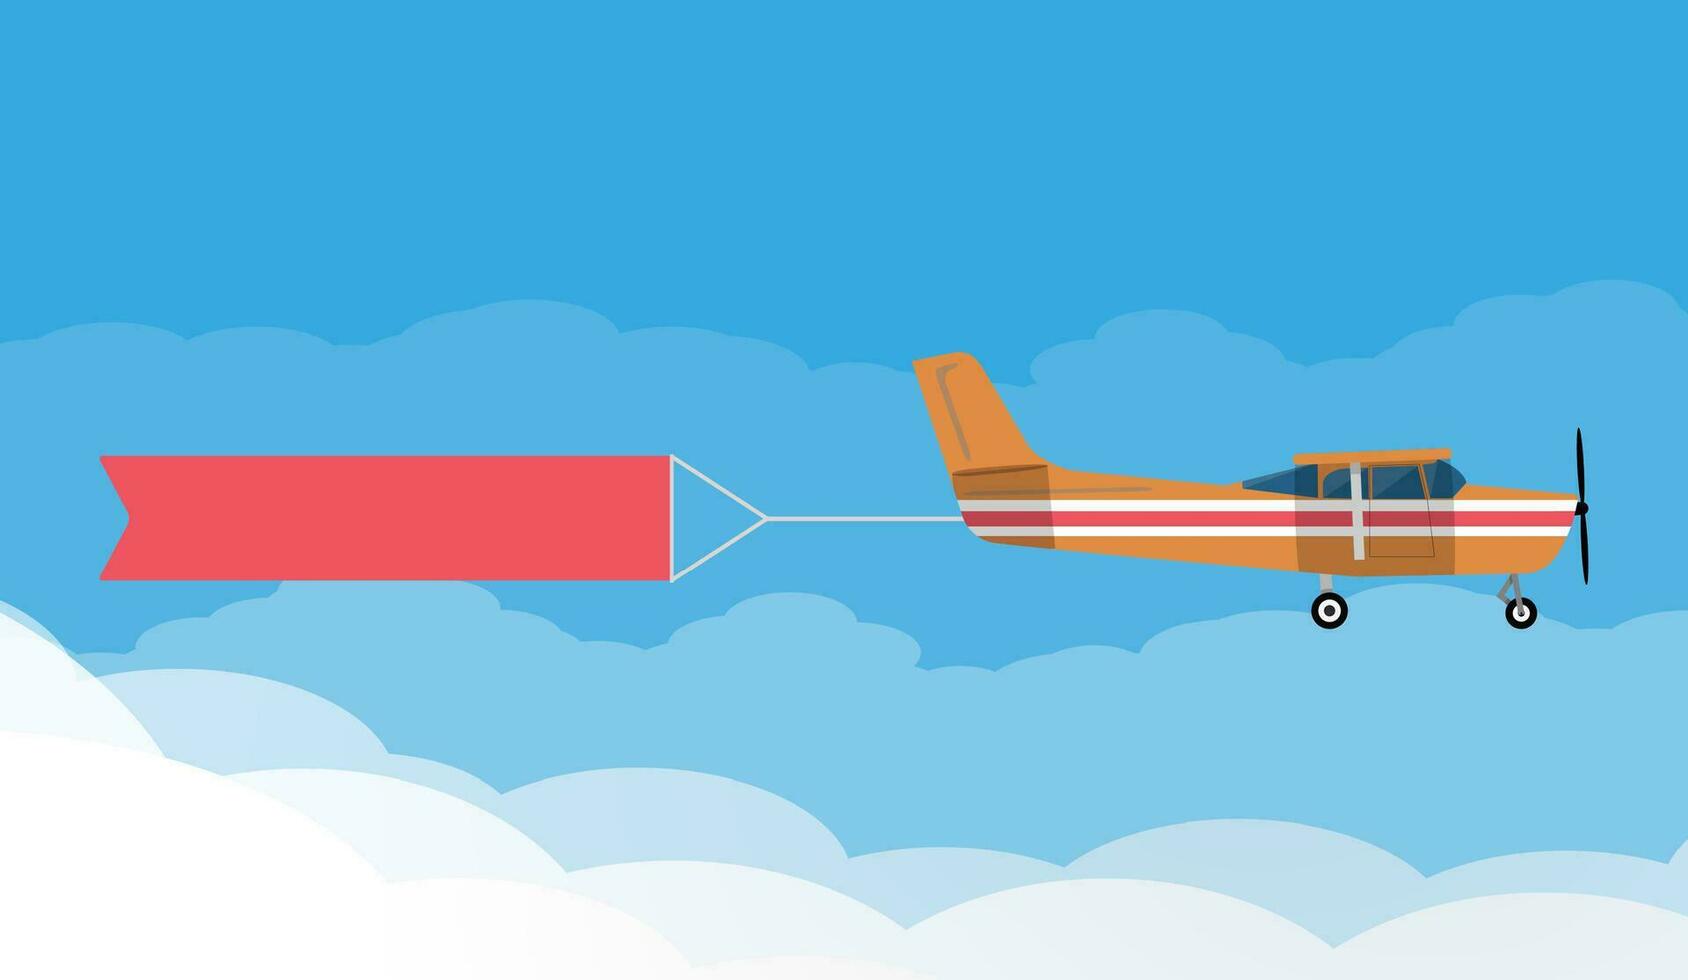 Red flying advertising banner pulled by light orange plane in blue sky with white clouds. vector illustration in flat design